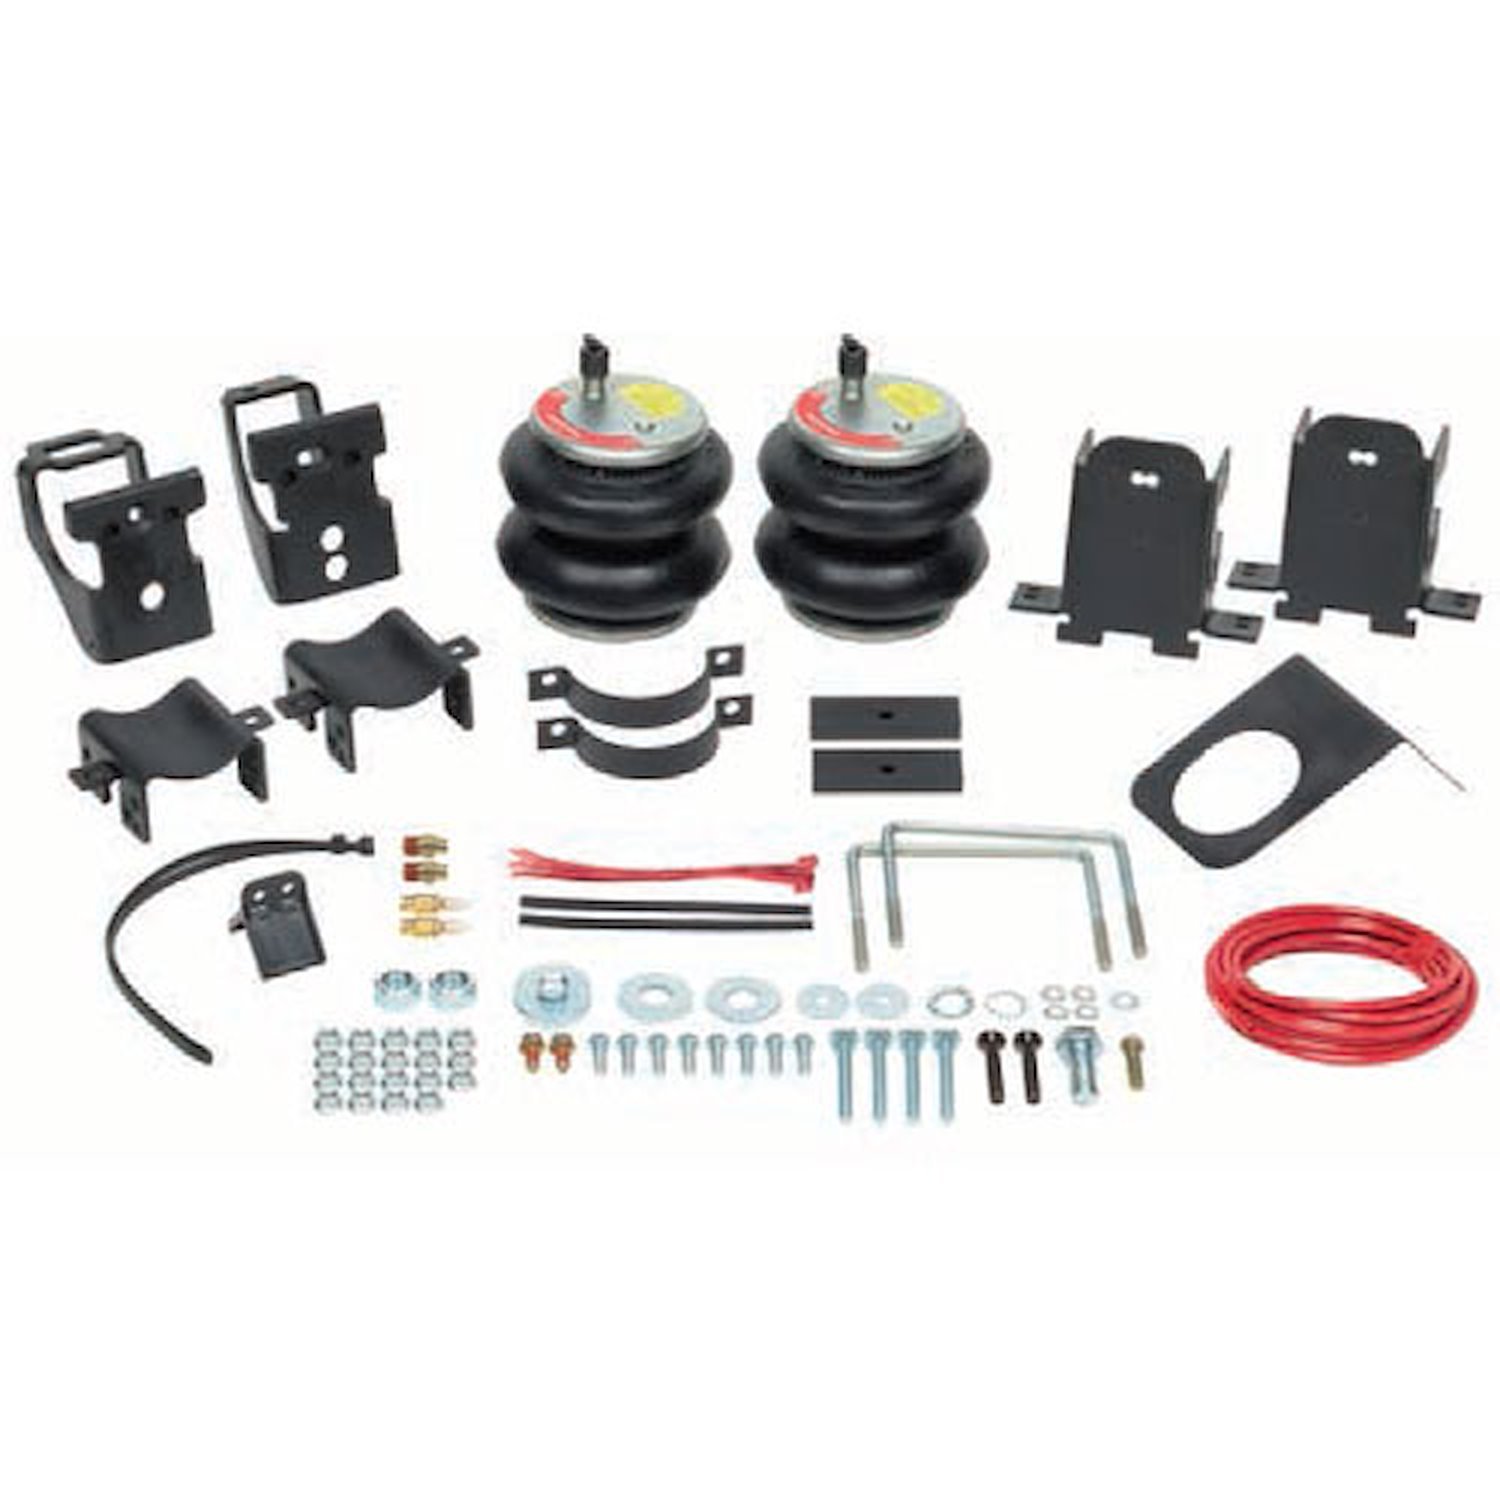 Ride-Rite Extreme Duty Air Spring Kit 2003-13 Dodge